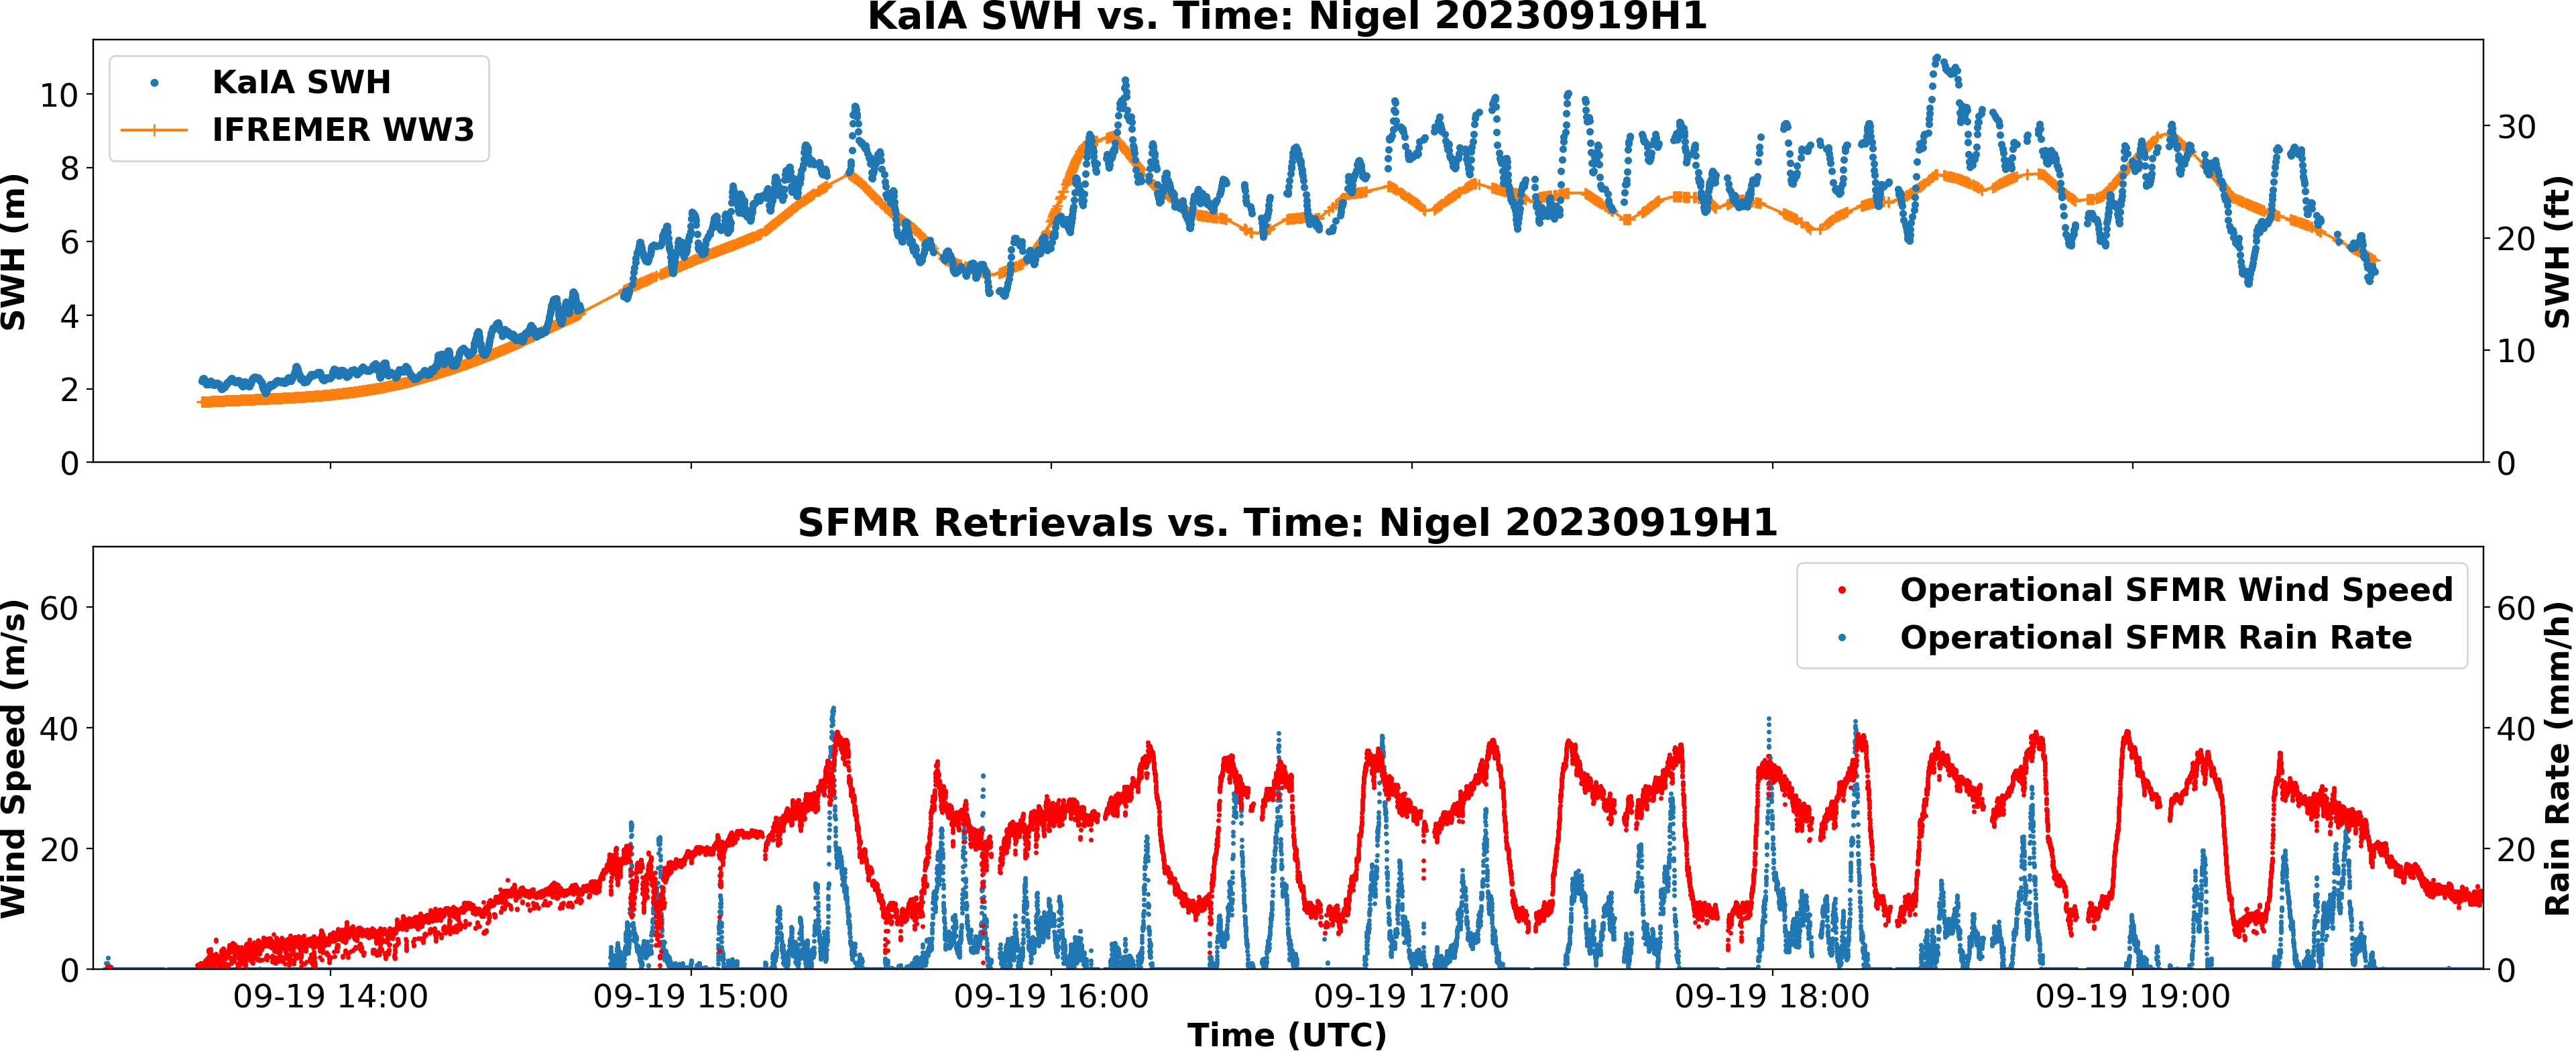 Time-series of KaIA significant wave height retrievals (top) and SFMR retrievals (bottom) from  
Hurricane Nigel on September 19. In the top panel, the model wave forecast from the IFREMER Wavewatch3 model is shown as orange roughly matching the KaIA samples in blue.  The bottom panel shows SFMR retrievals which are windspeeds measured from the bottom of the plane. Heavy rain rates in blue colors degrade the wind measurements.